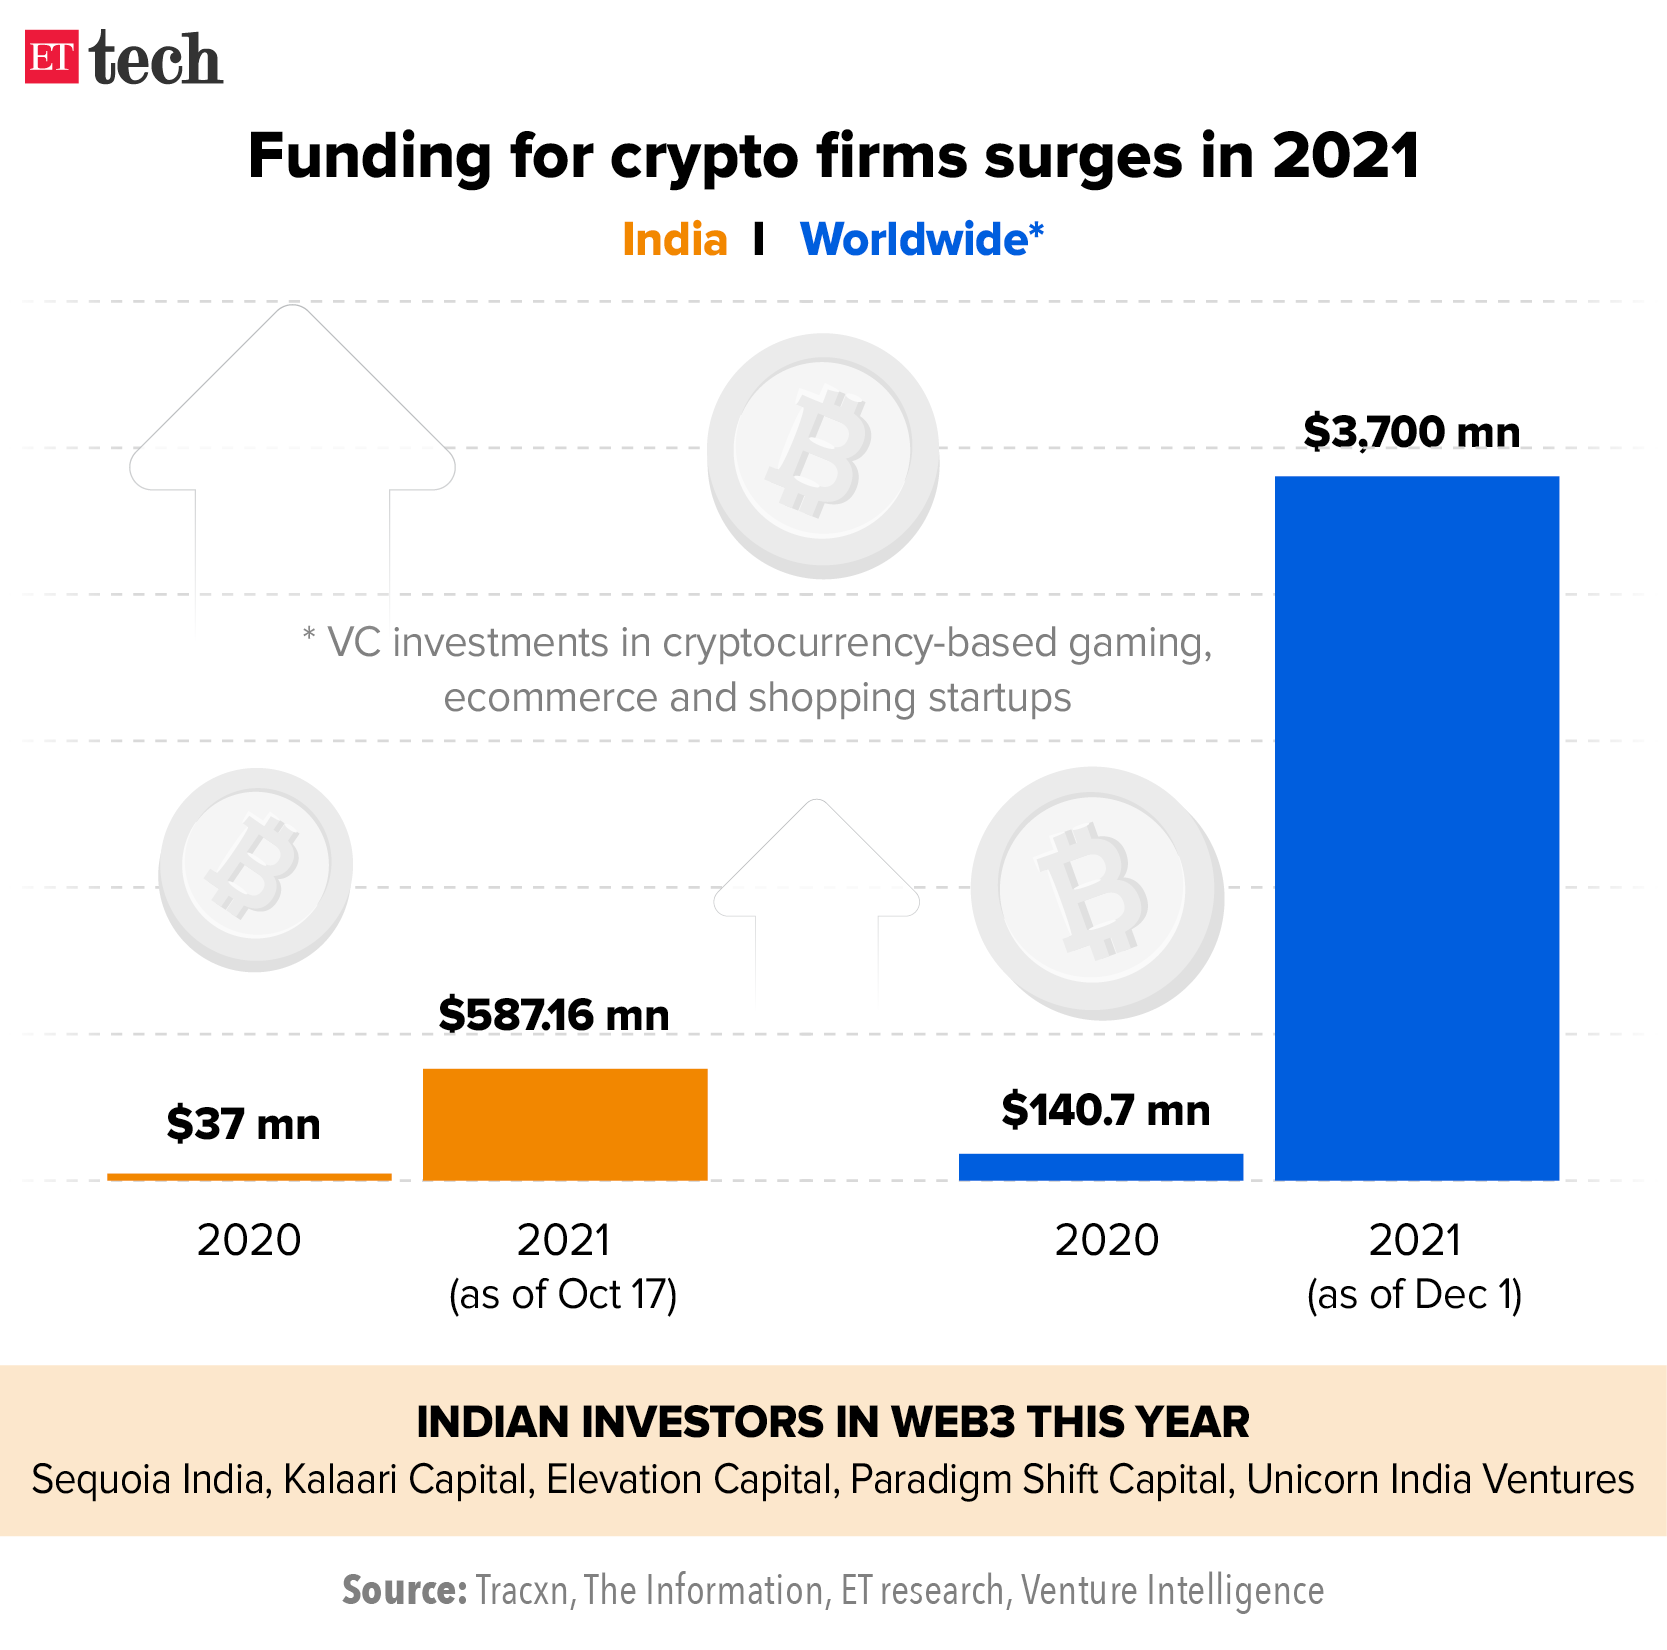 Funding for crypto firms surges in 2021